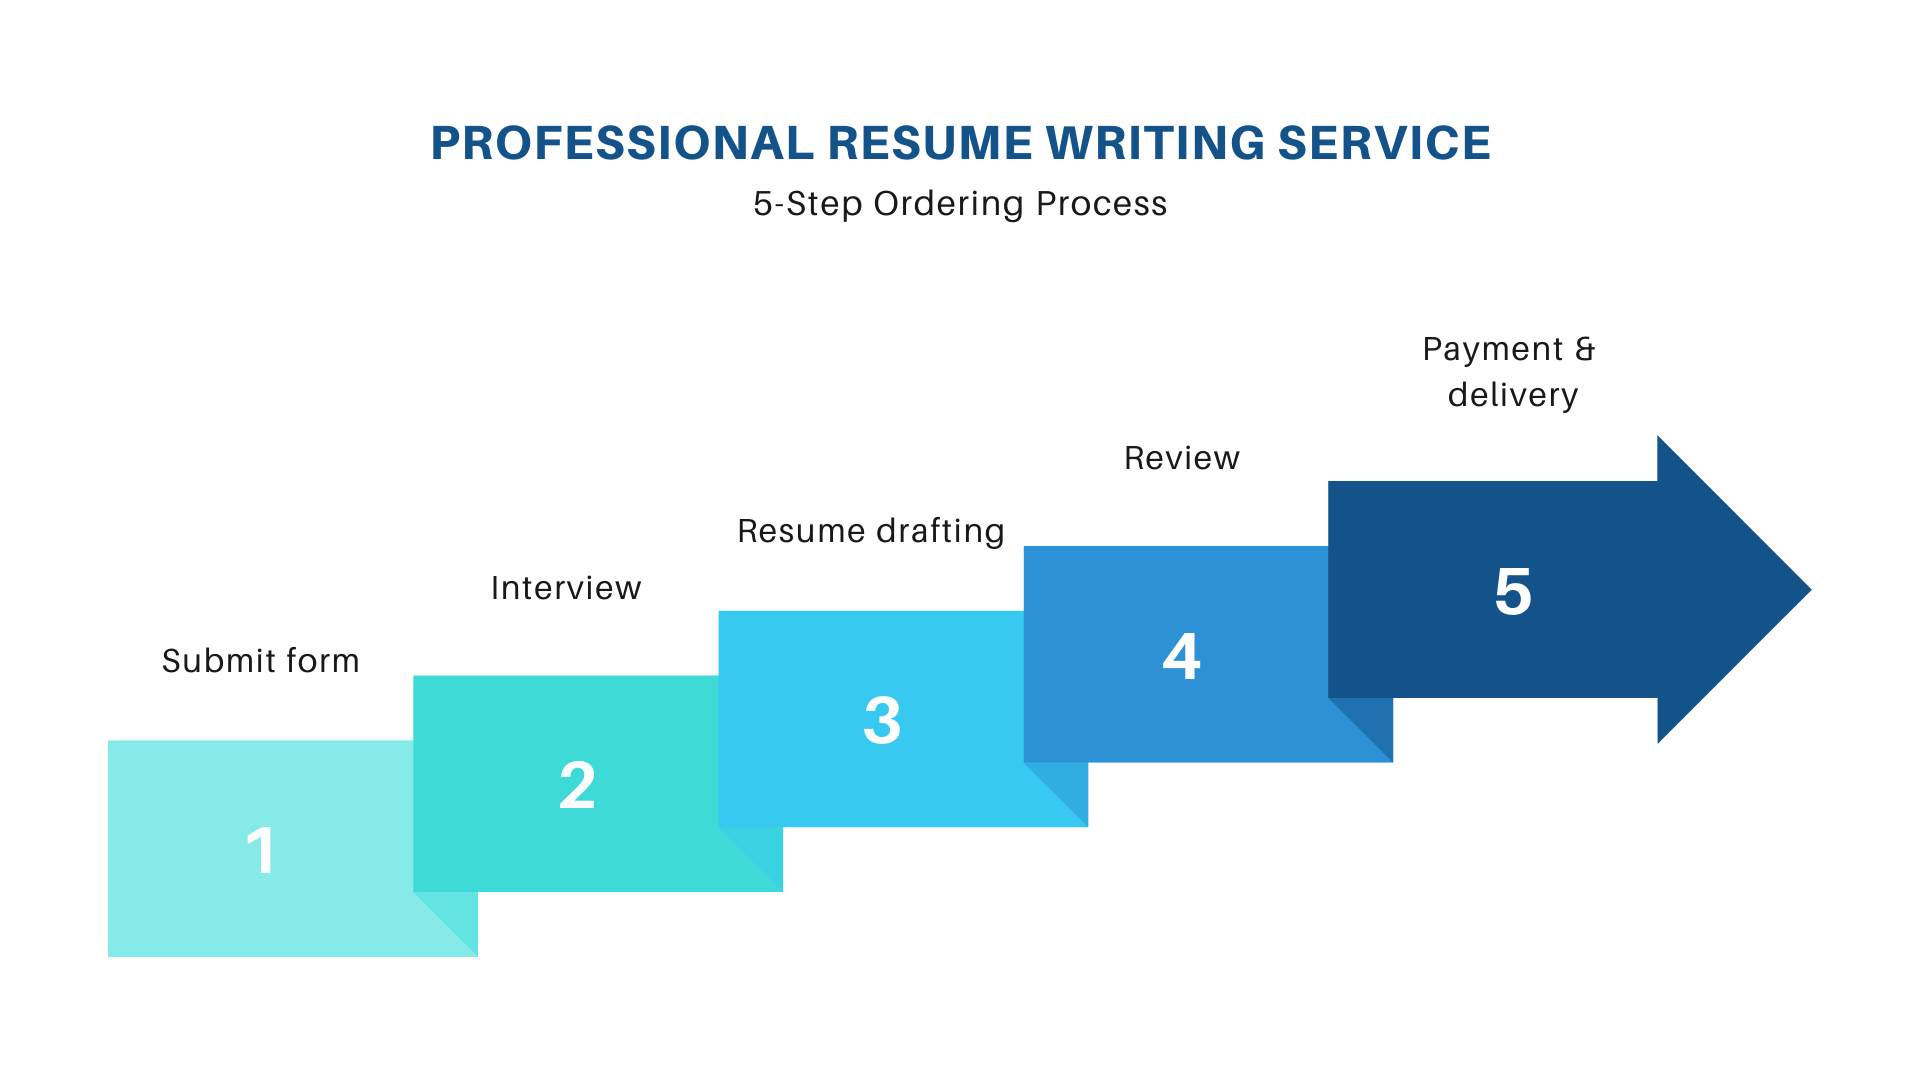 resume writing service meaning